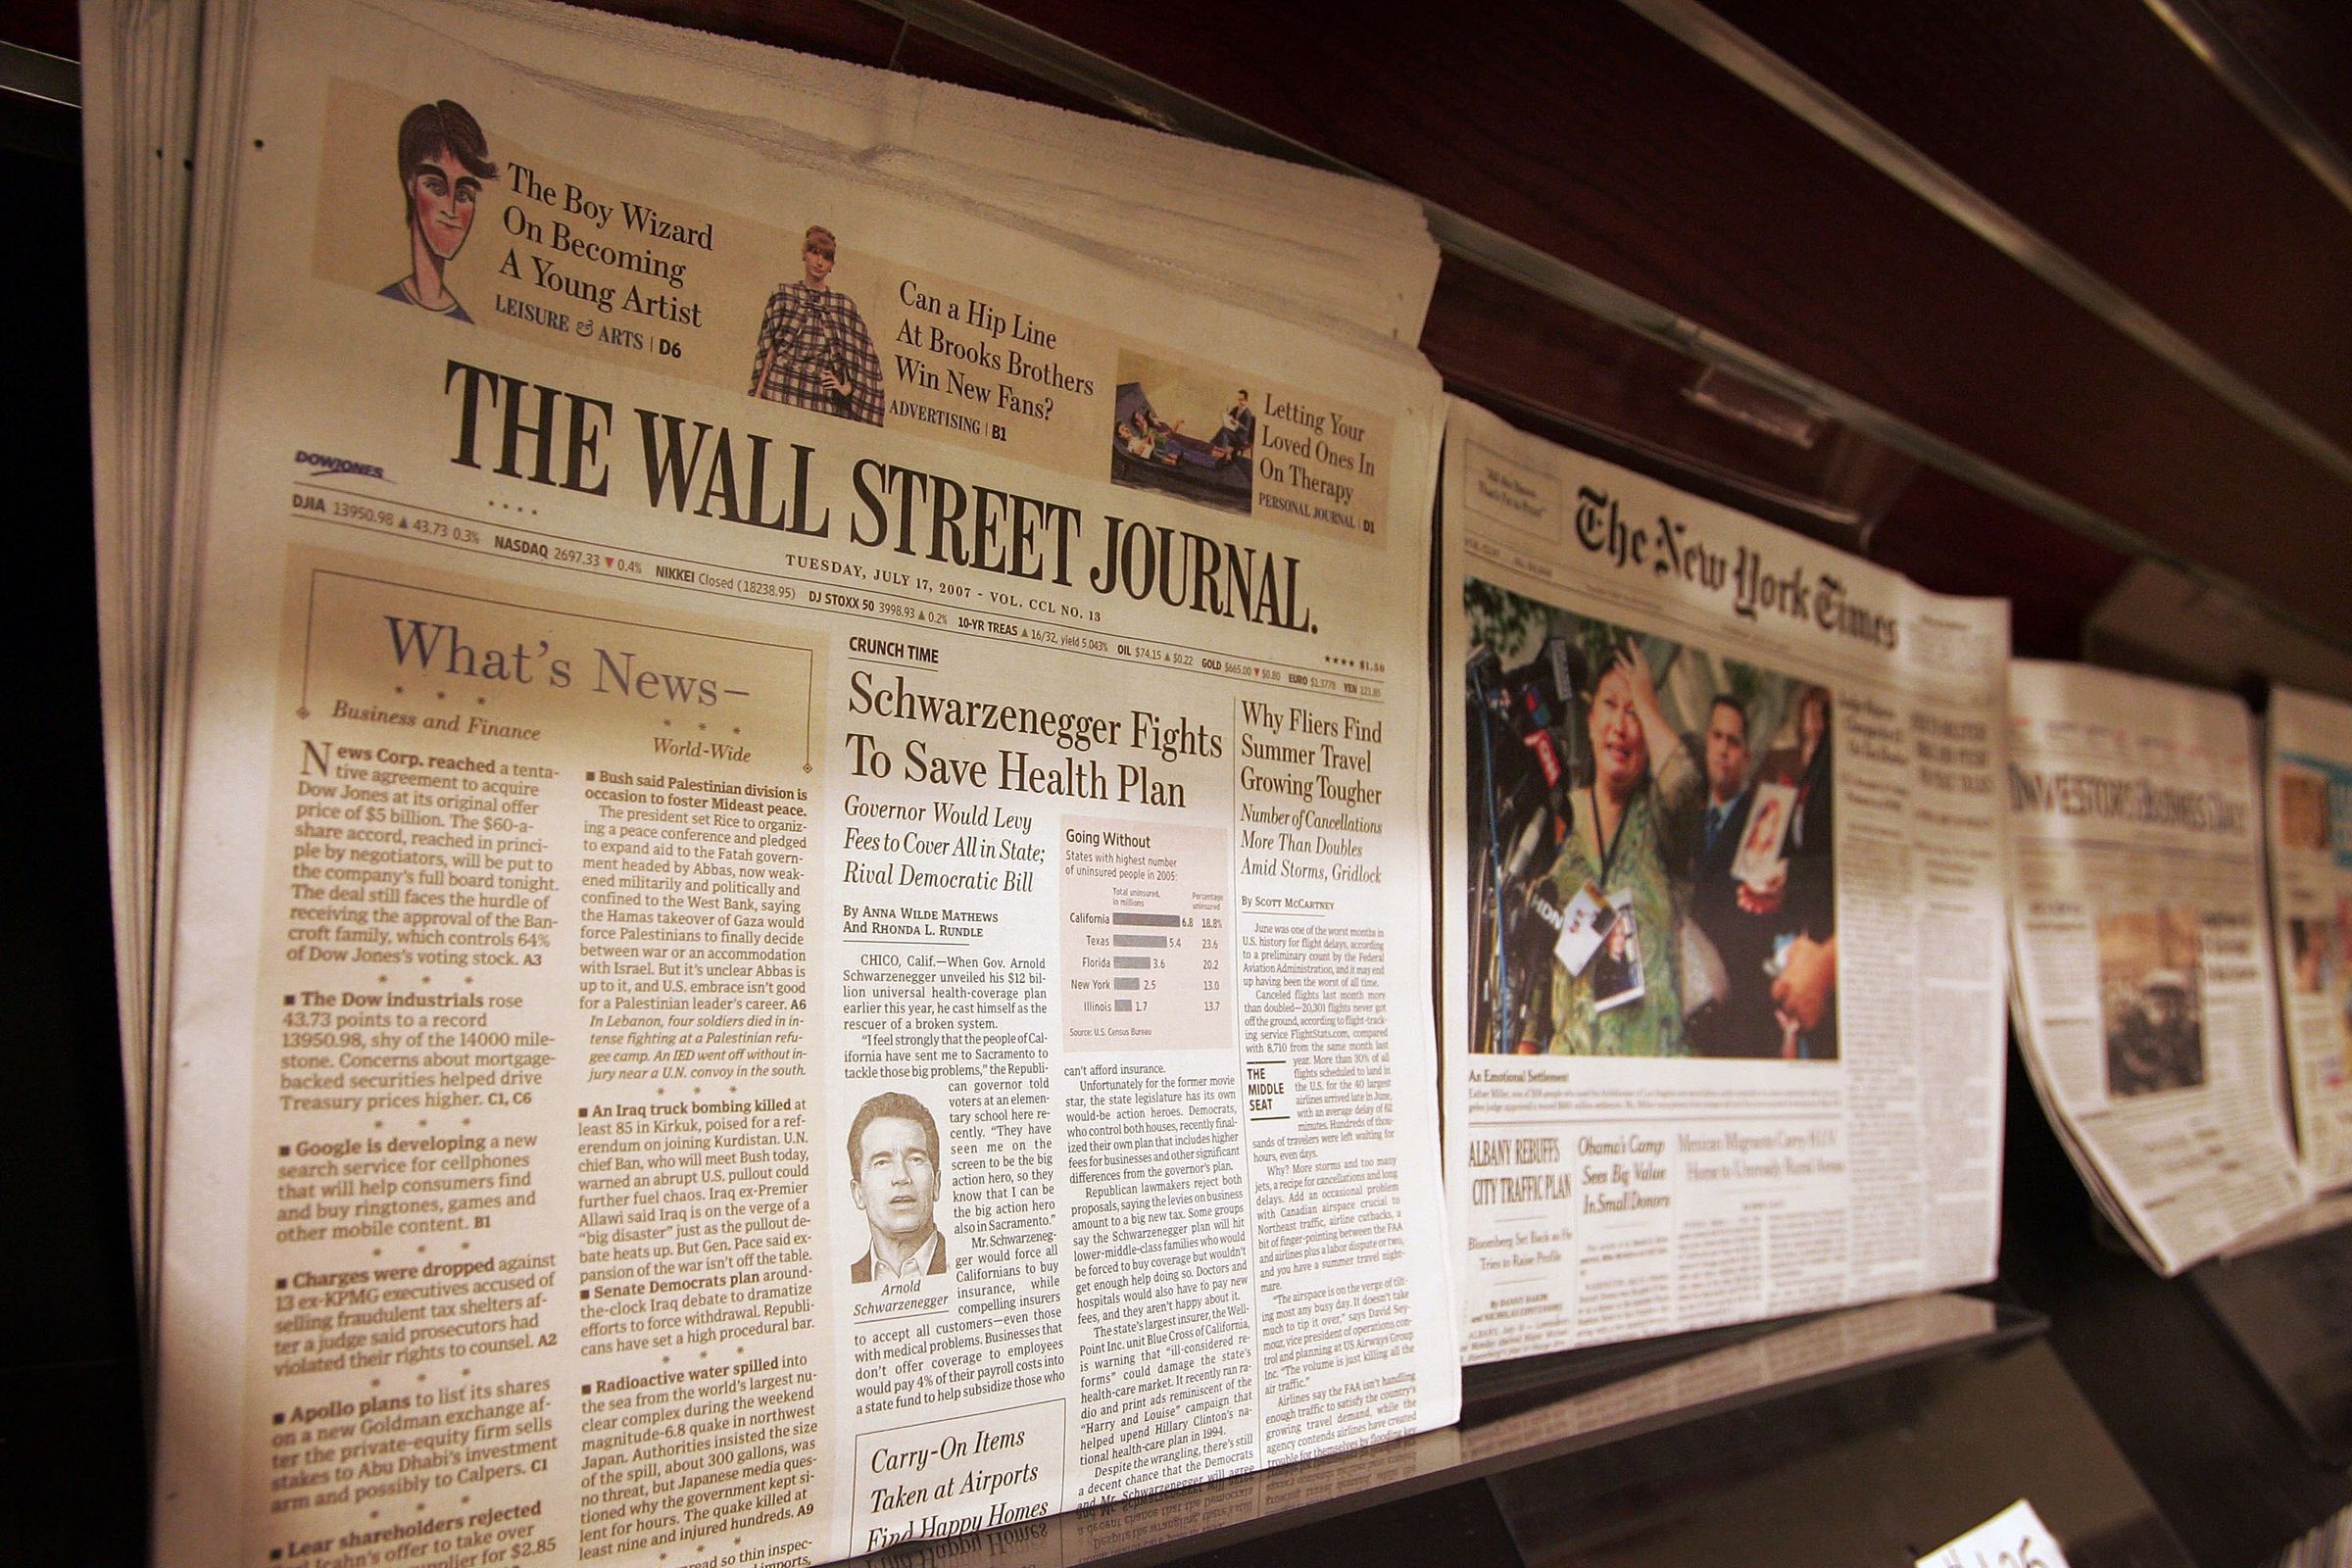 Dow Jones And News Corp Close To Deal On Wall Street Journal